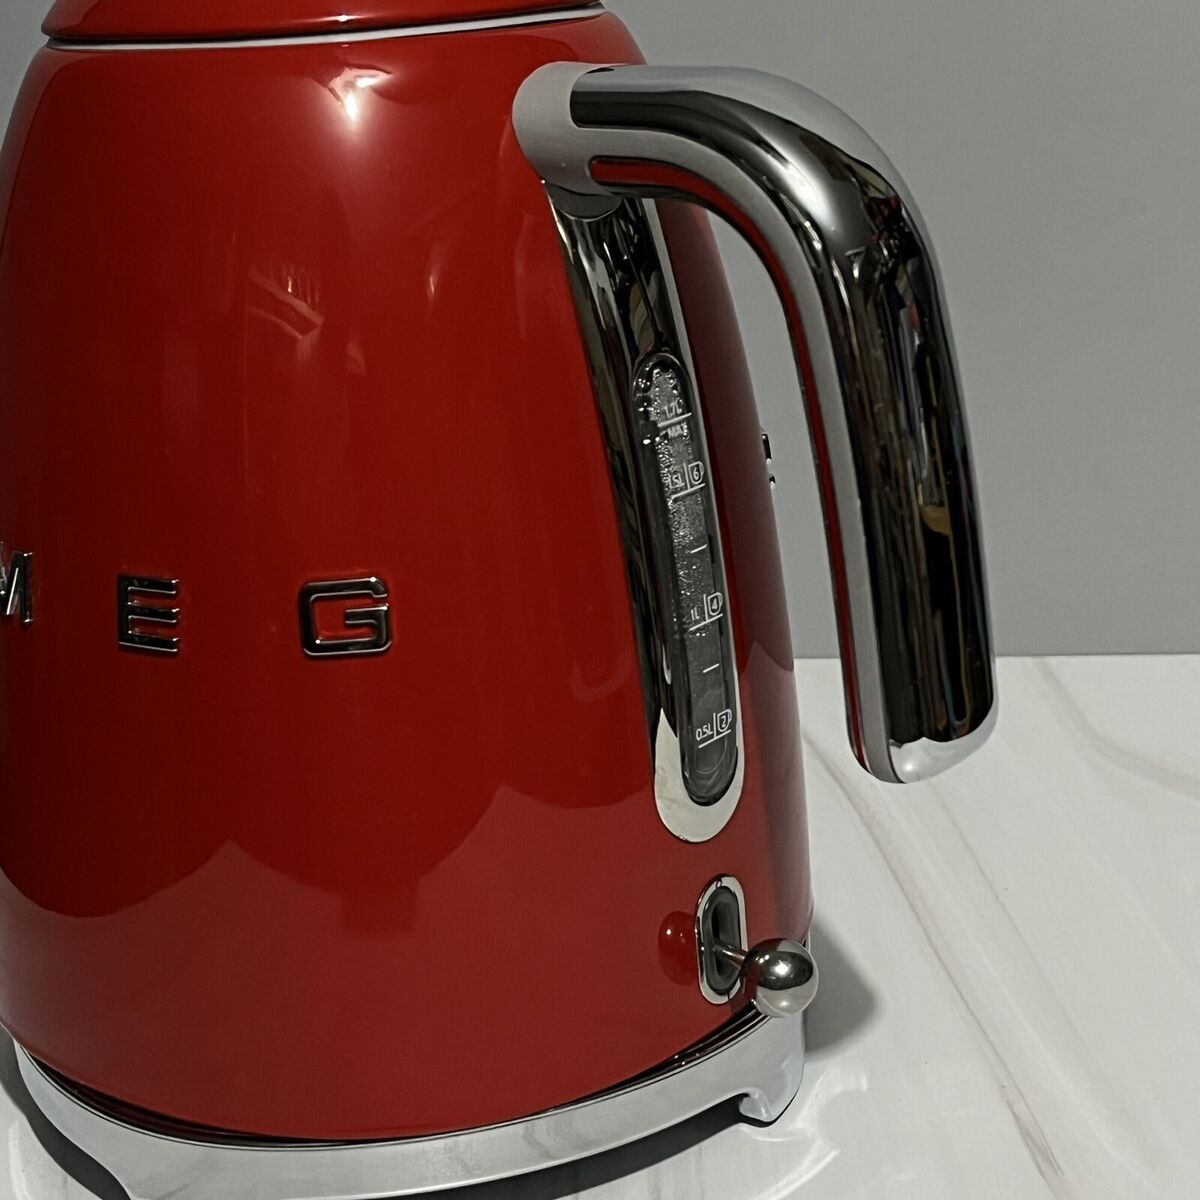 Smeg 50's Retro Style Red Electric Kettle - KLF03RDUS